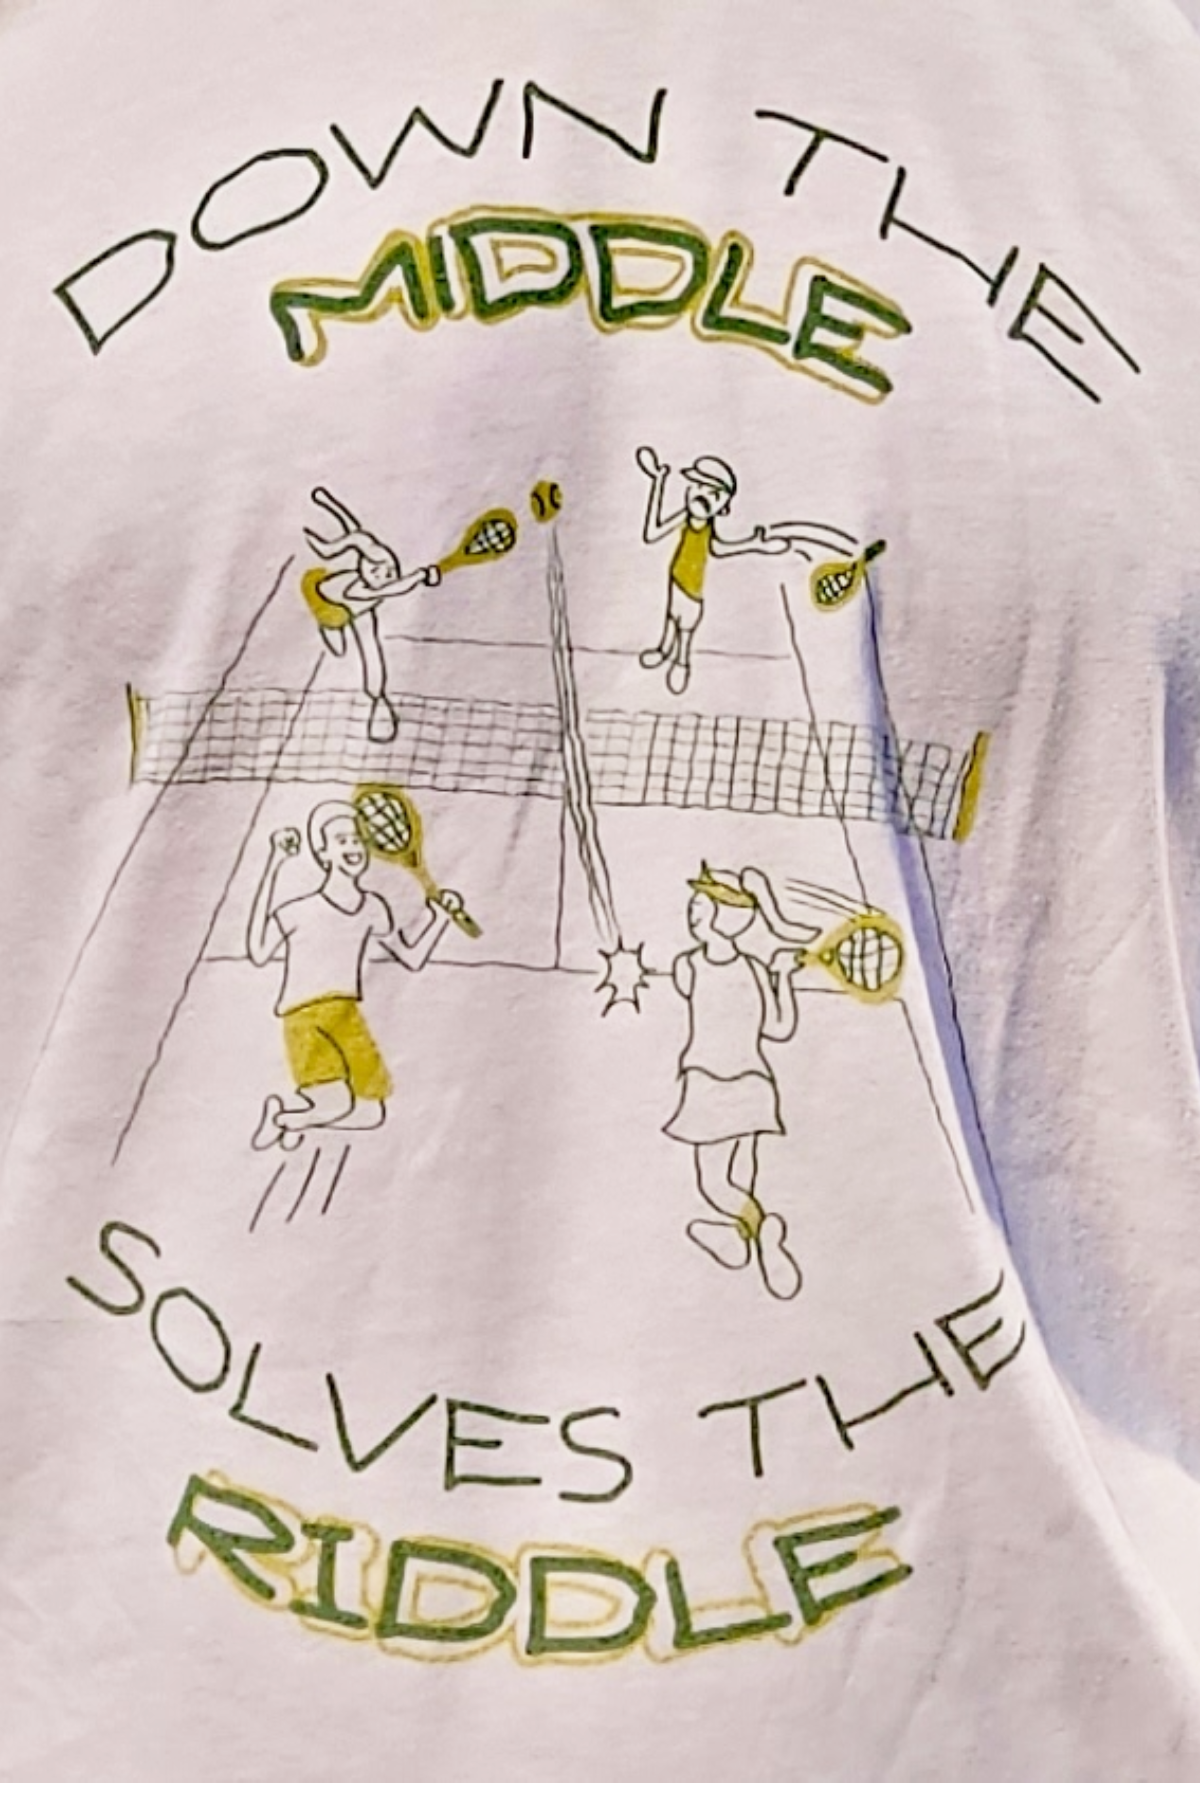 Down the Middle Solves the Riddle Tee